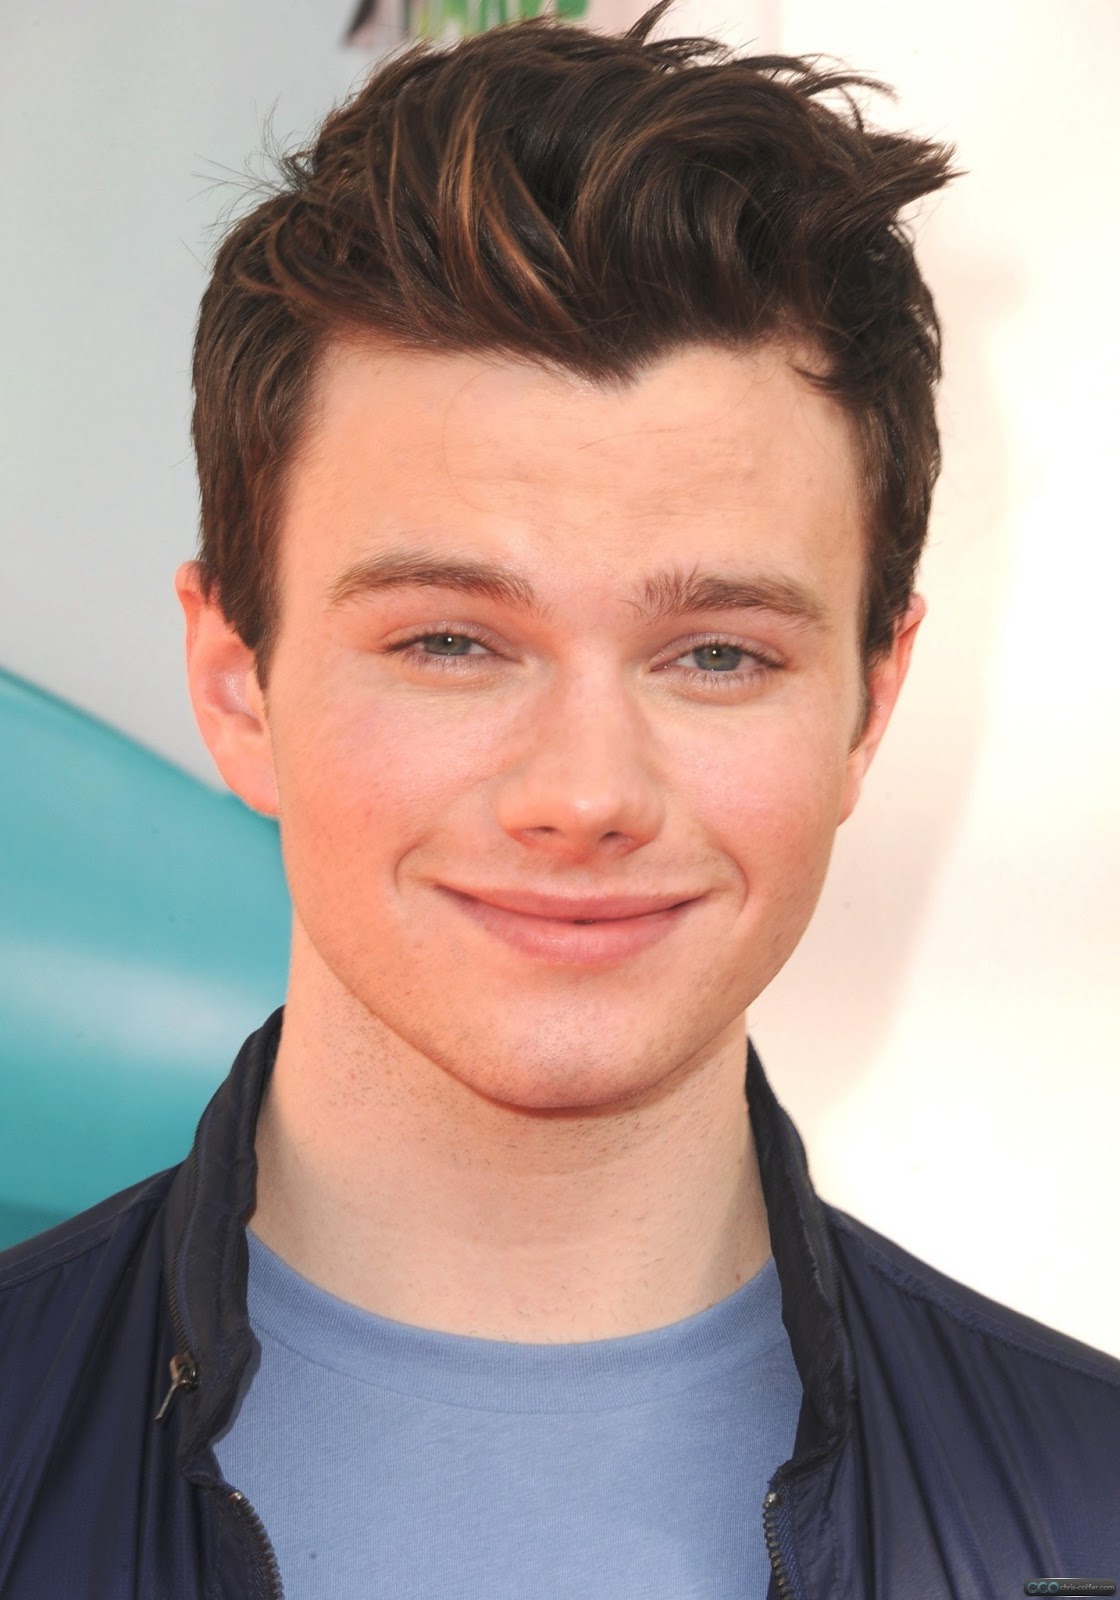 Chris Colfer HairStyle (Men HairStyles) - Men Hair Styles Collection